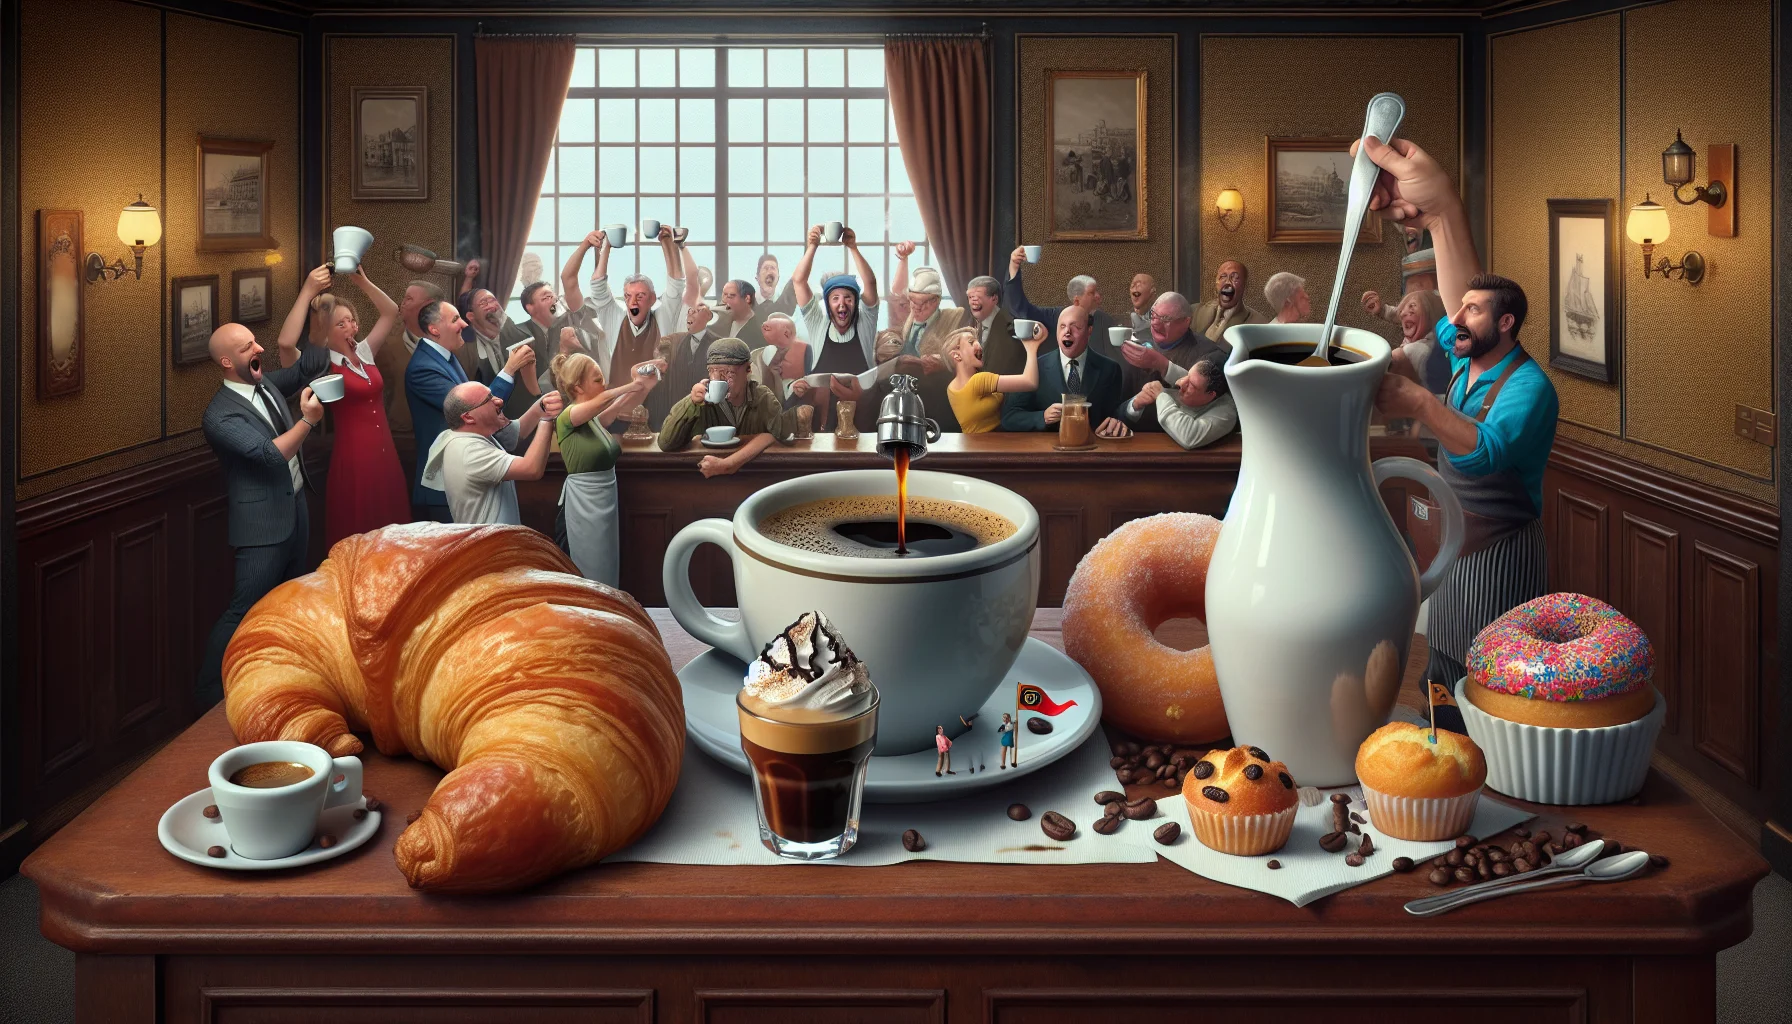 Create a humorous scene designed to entice people to enjoy coffee and espresso. The viewpoint is from an 'invisible barista', and the setting is an old-world café. Two mugs, one larger filled with brewed coffee and the other smaller filled with espresso, are displayed in the center. The coffee mug bears a comically oversized spoon, while the espresso cup contains an extraordinarily tiny spoon. Surrounding the mugs, an array of pastries - croissant, a donut, a muffin - each with a little flag rooting for their favourite drink. Toward the back, customers of diverse gender and descent are engaged in playful banter and laughter.